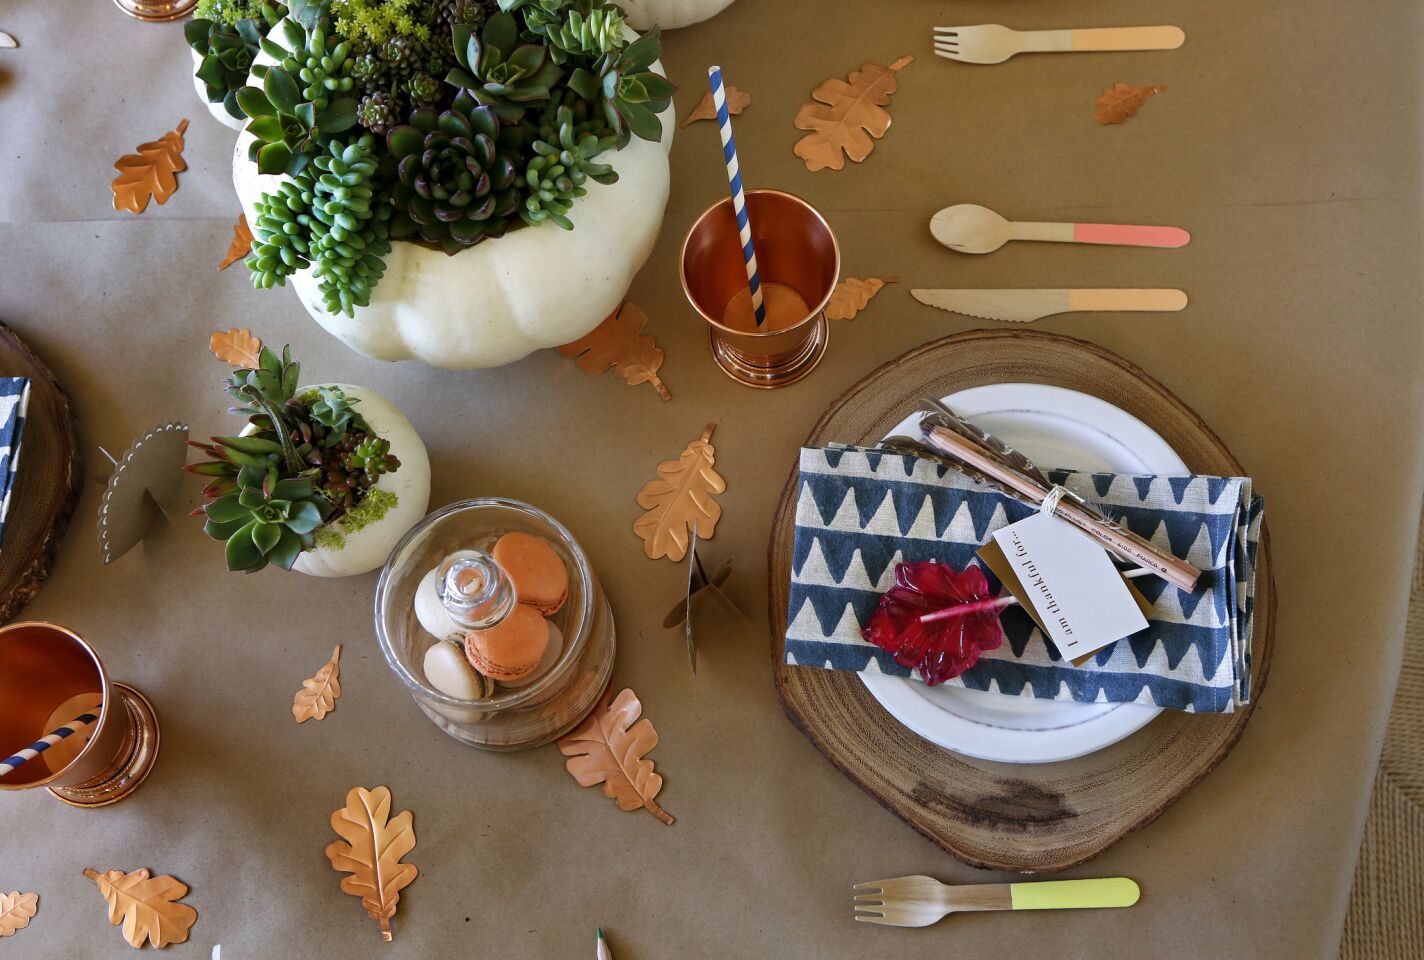 Wooden, disposable utensils, copper leaves, and a lollipop on the place setting are part of a kid's tablescape for the holidays, arranged by Shannon Wollack, David Ko, and Julianne Goldmark, designers with Studio Life.Style.